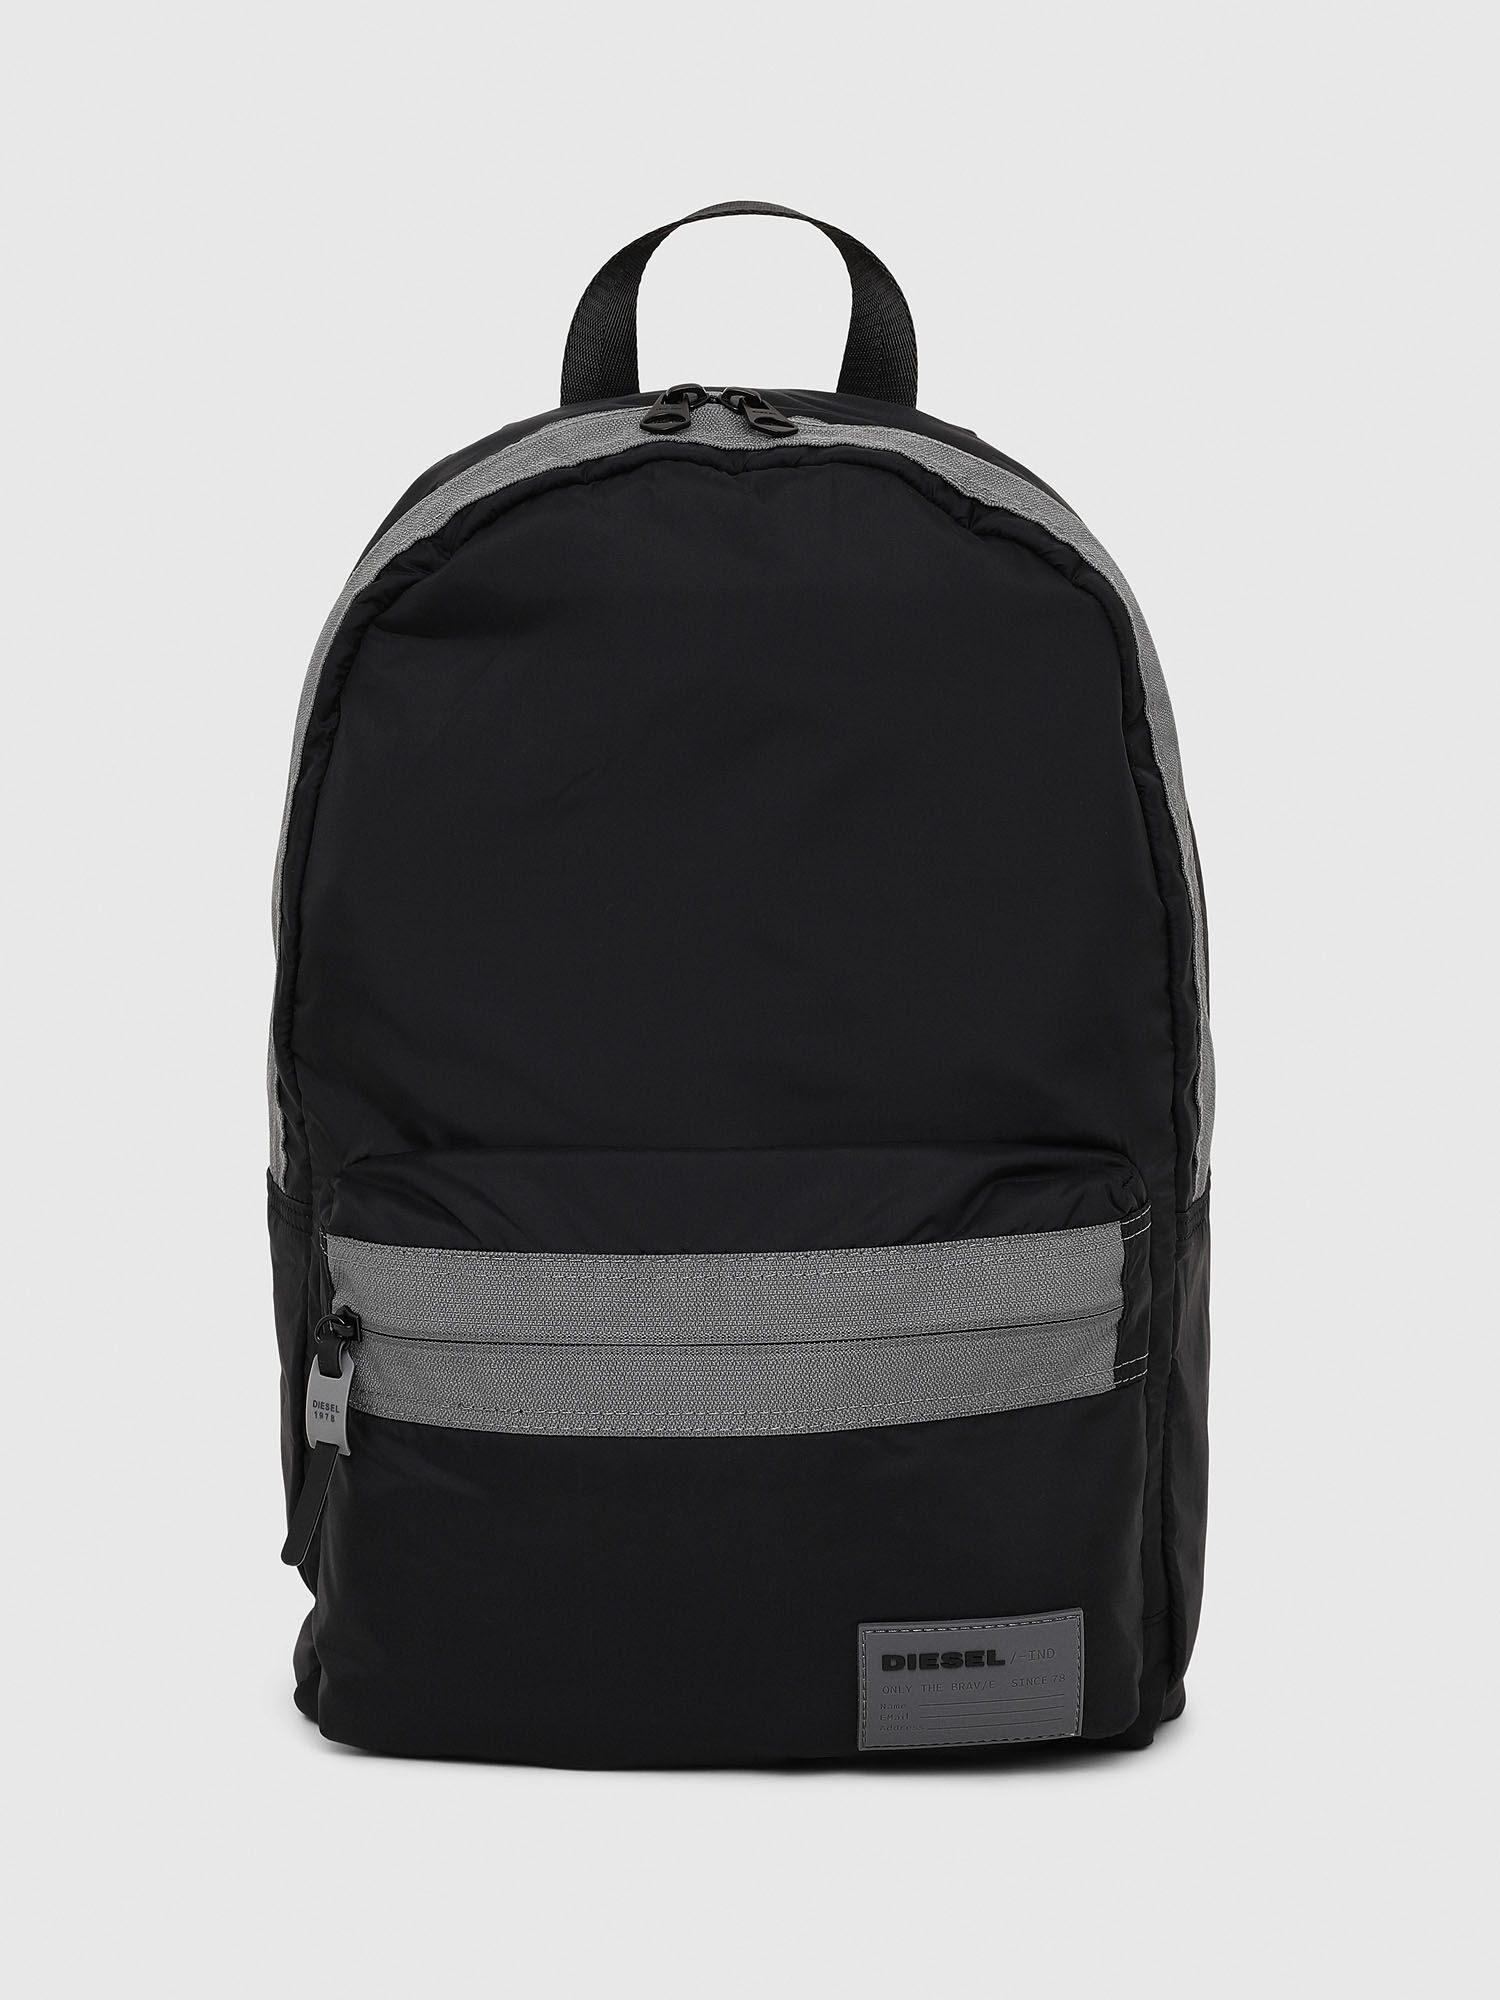 MIRANO Man: Backpack in fabric and polyester | Diesel